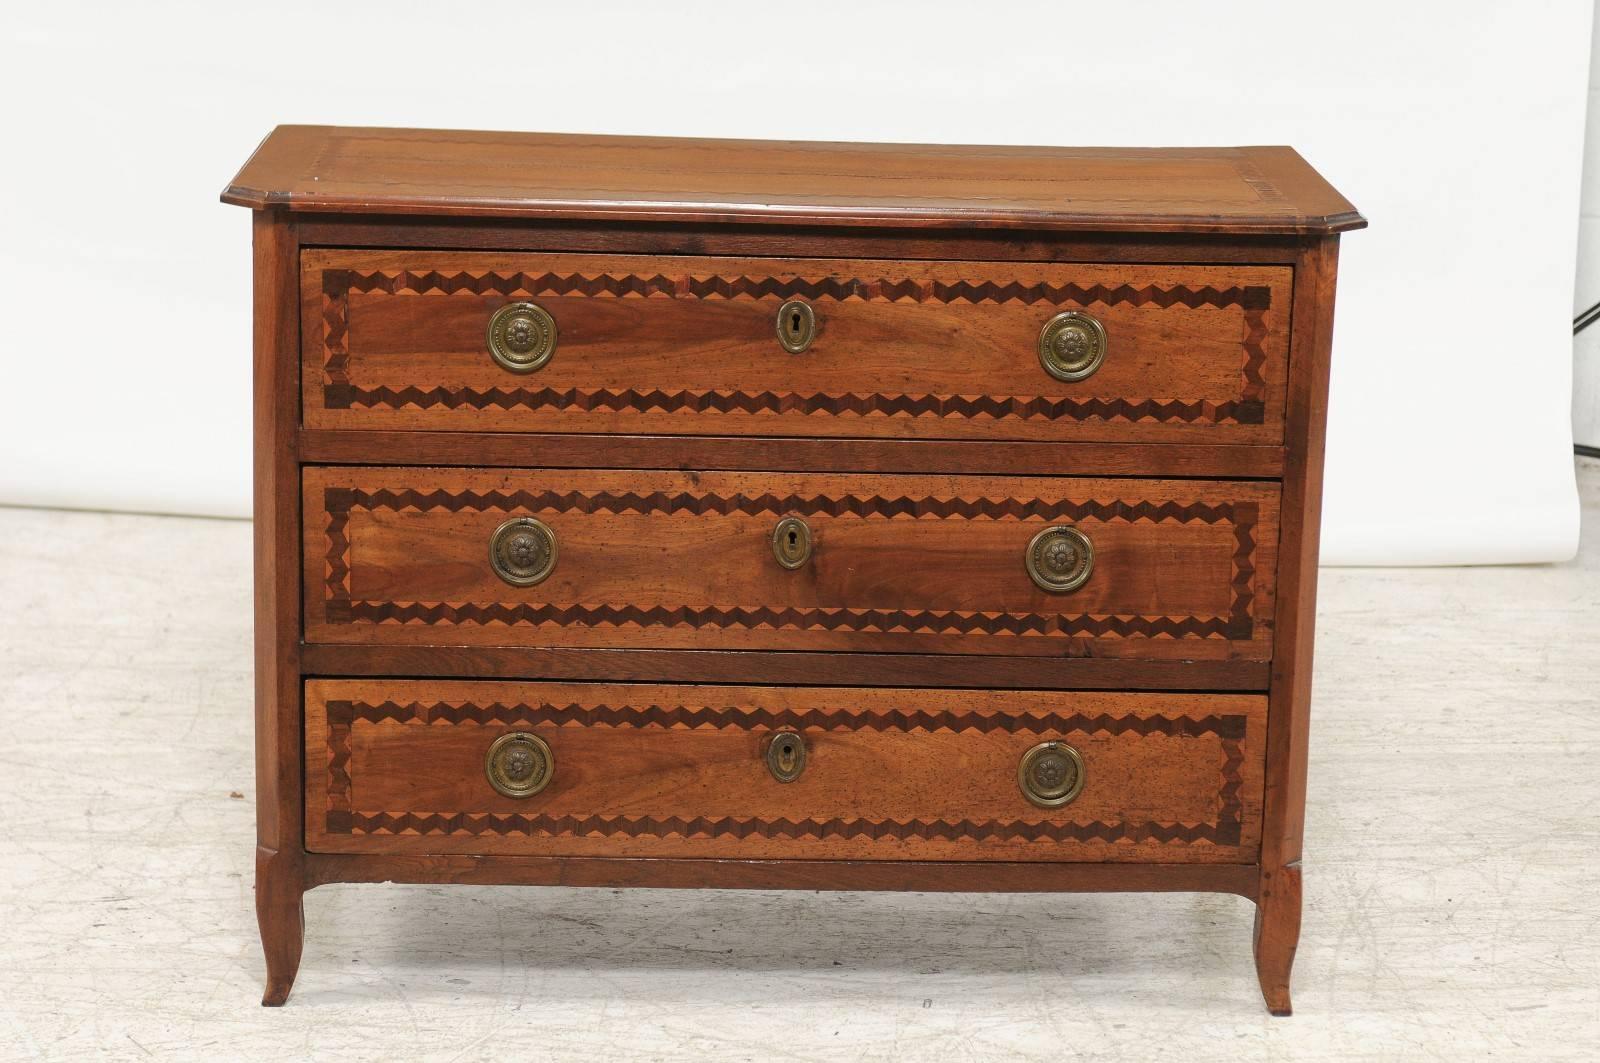 An Italian three-drawer marquetry commode with inlaid zigzag patterns from the early 19th century. This Italian commode features a rectangular top with canted corners in the front, delicately inlaid with zigzag motifs. The façade, made of three